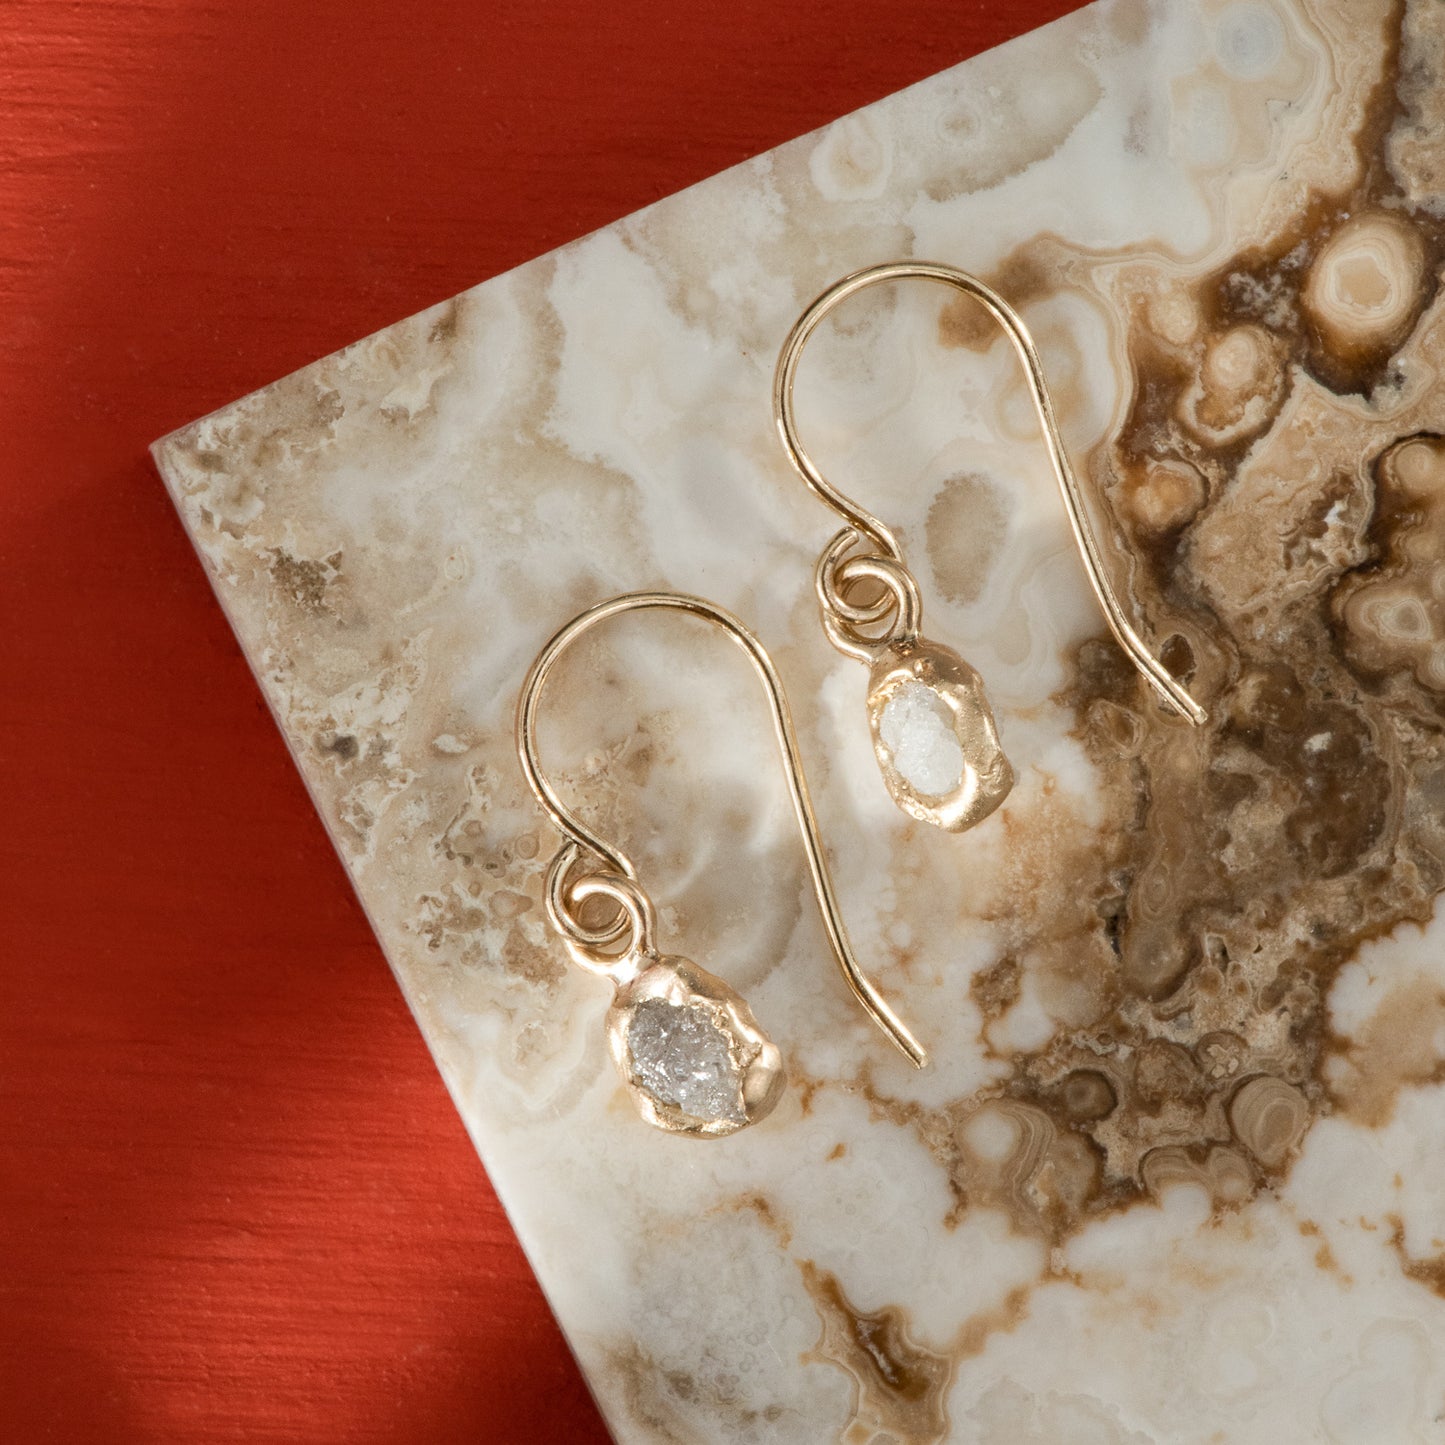 Polished yellow gold hook earrings, with a dangle of rough, grey diamond dipped in gold.